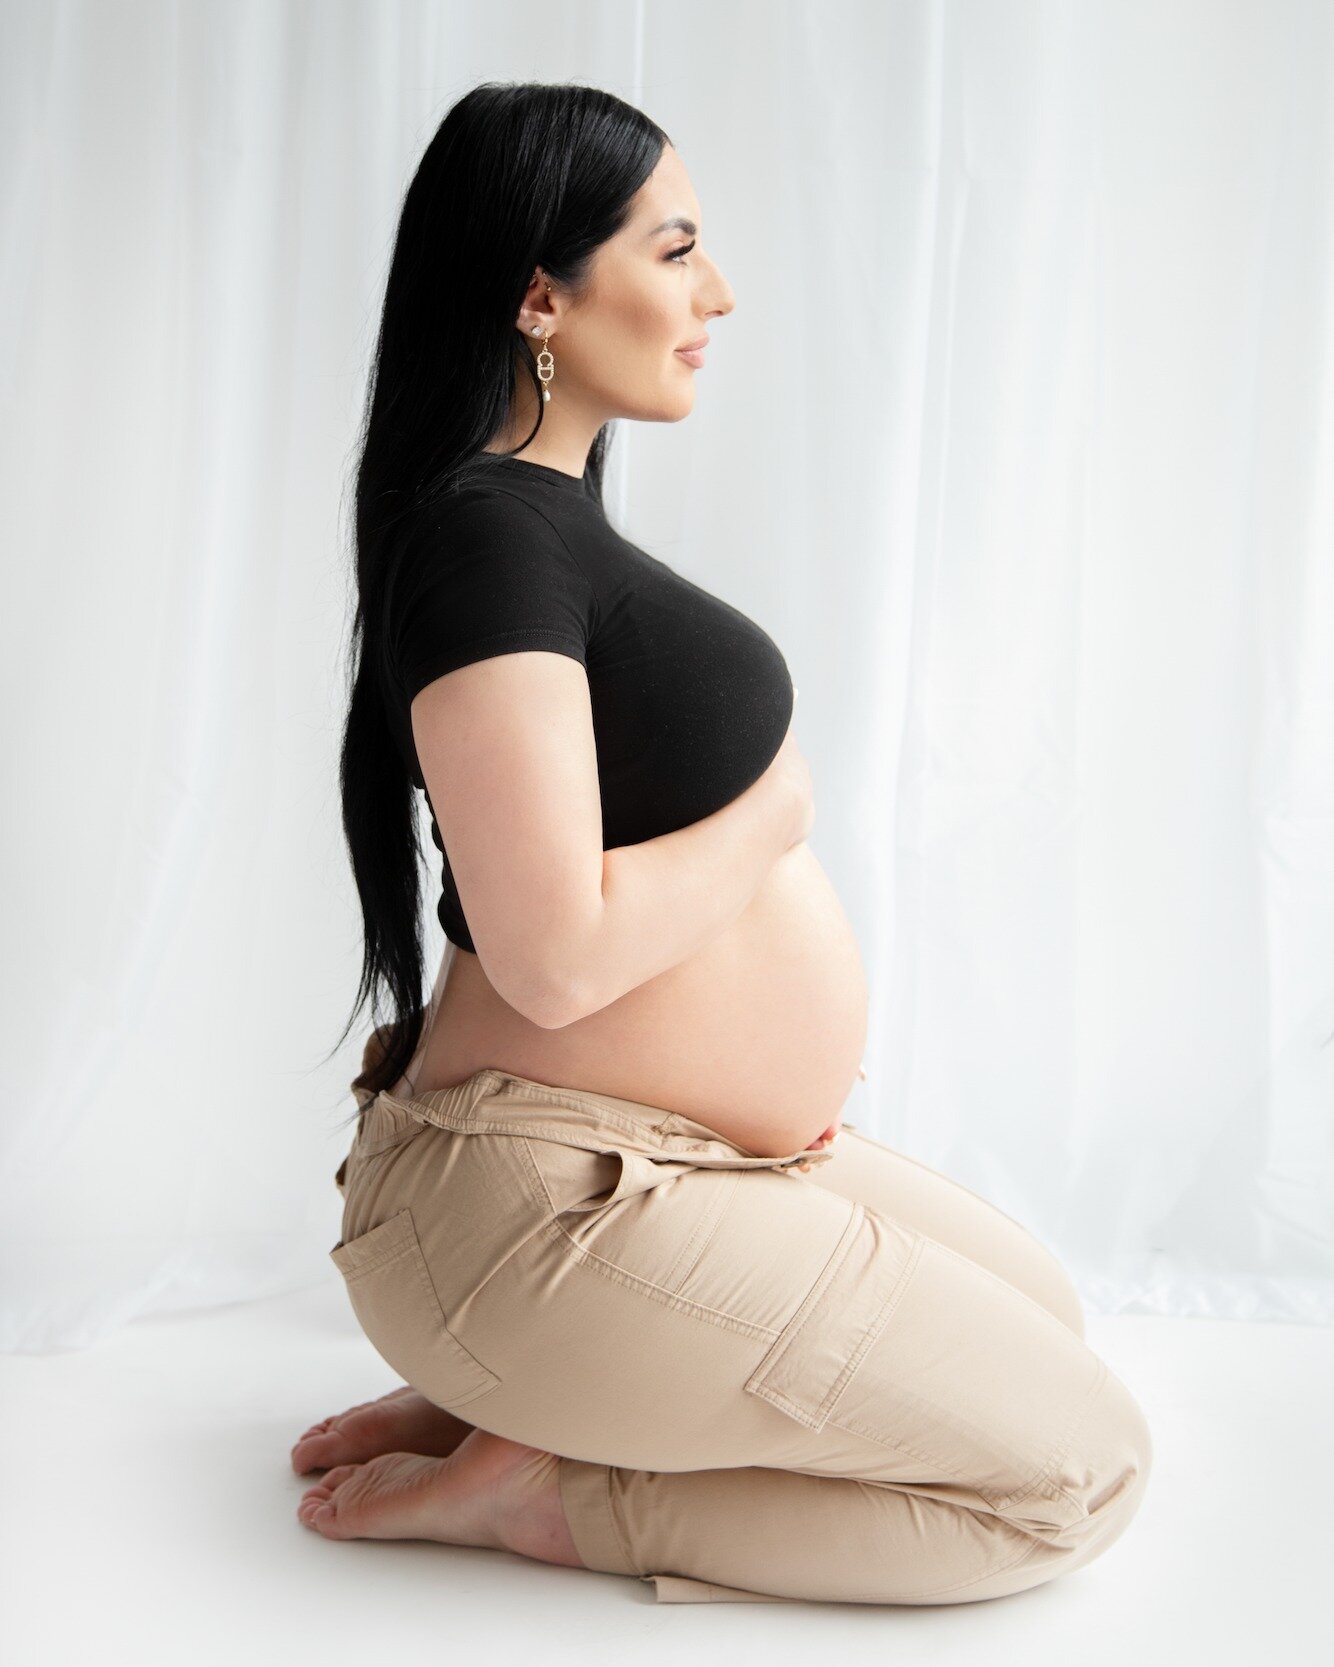 Our maternity photoshoots capture the beauty, grace, and anticipation of motherhood! 🌸
Book now to embrace the journey with us and let your inner radiance shine! 📷💖
#YoubyZeny #StudioZeny